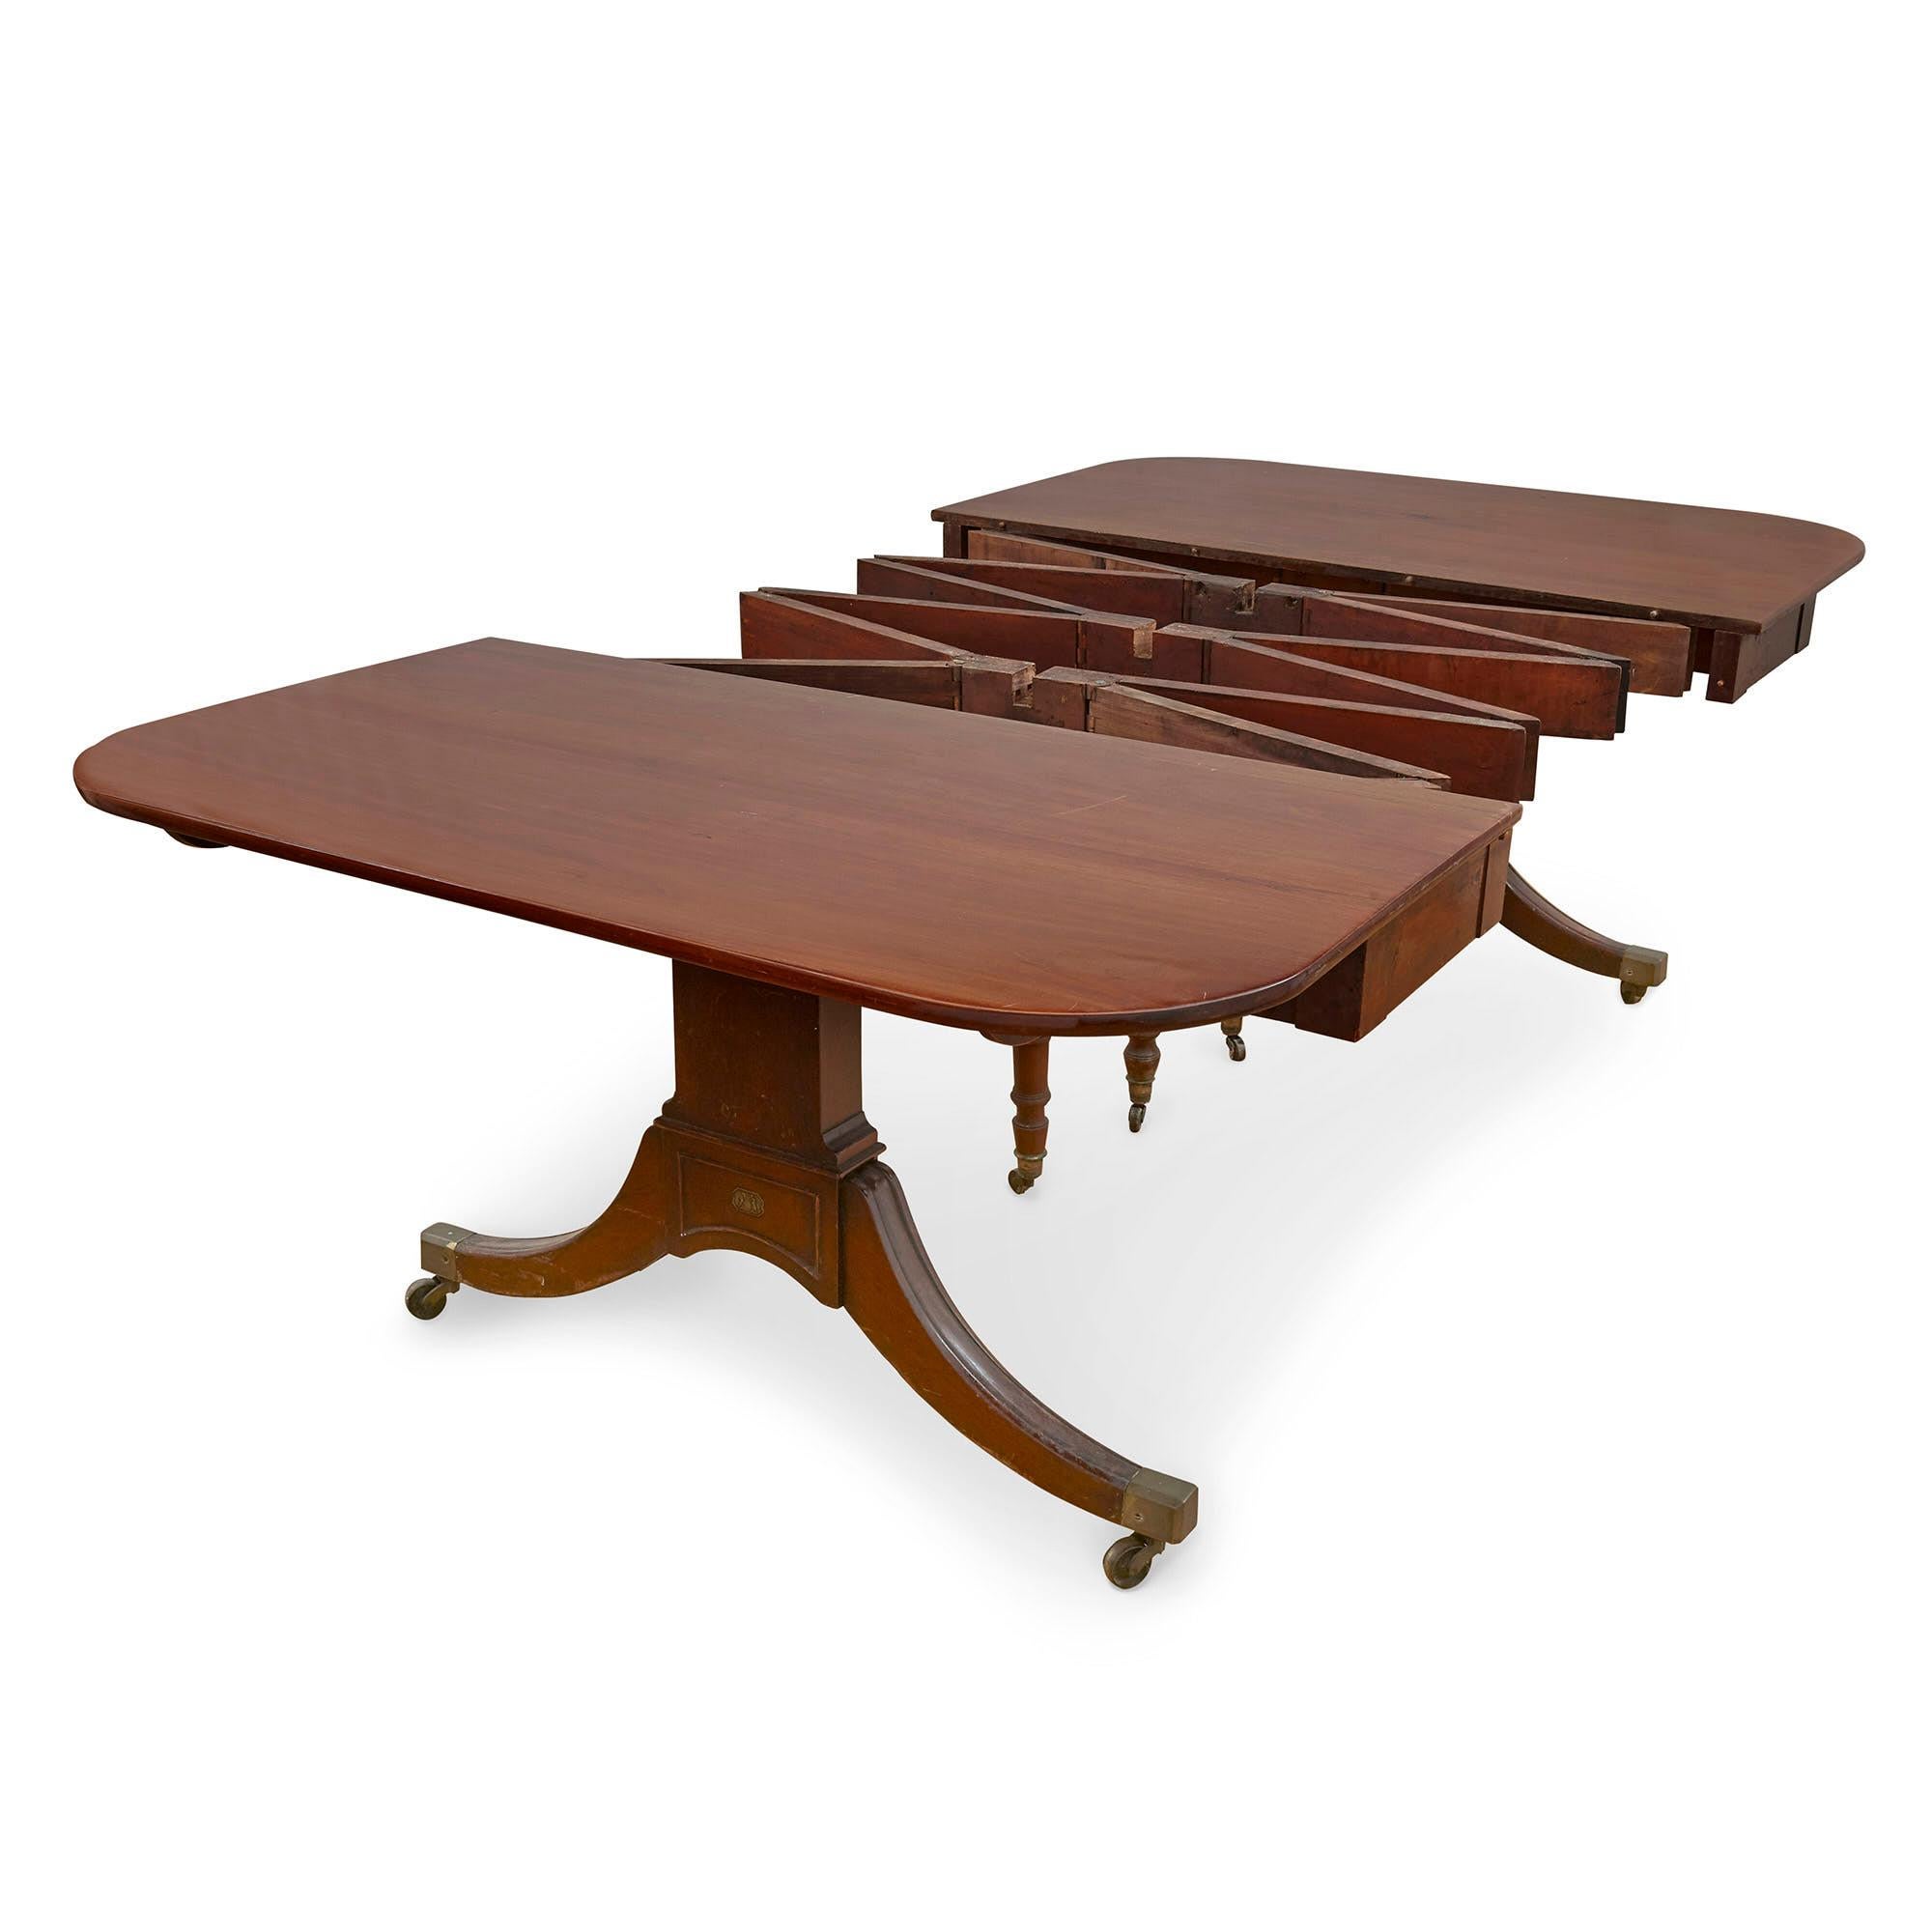 Regency Early 19th Century 'Cumberland' Mahogany Dining Table by David Edwards For Sale